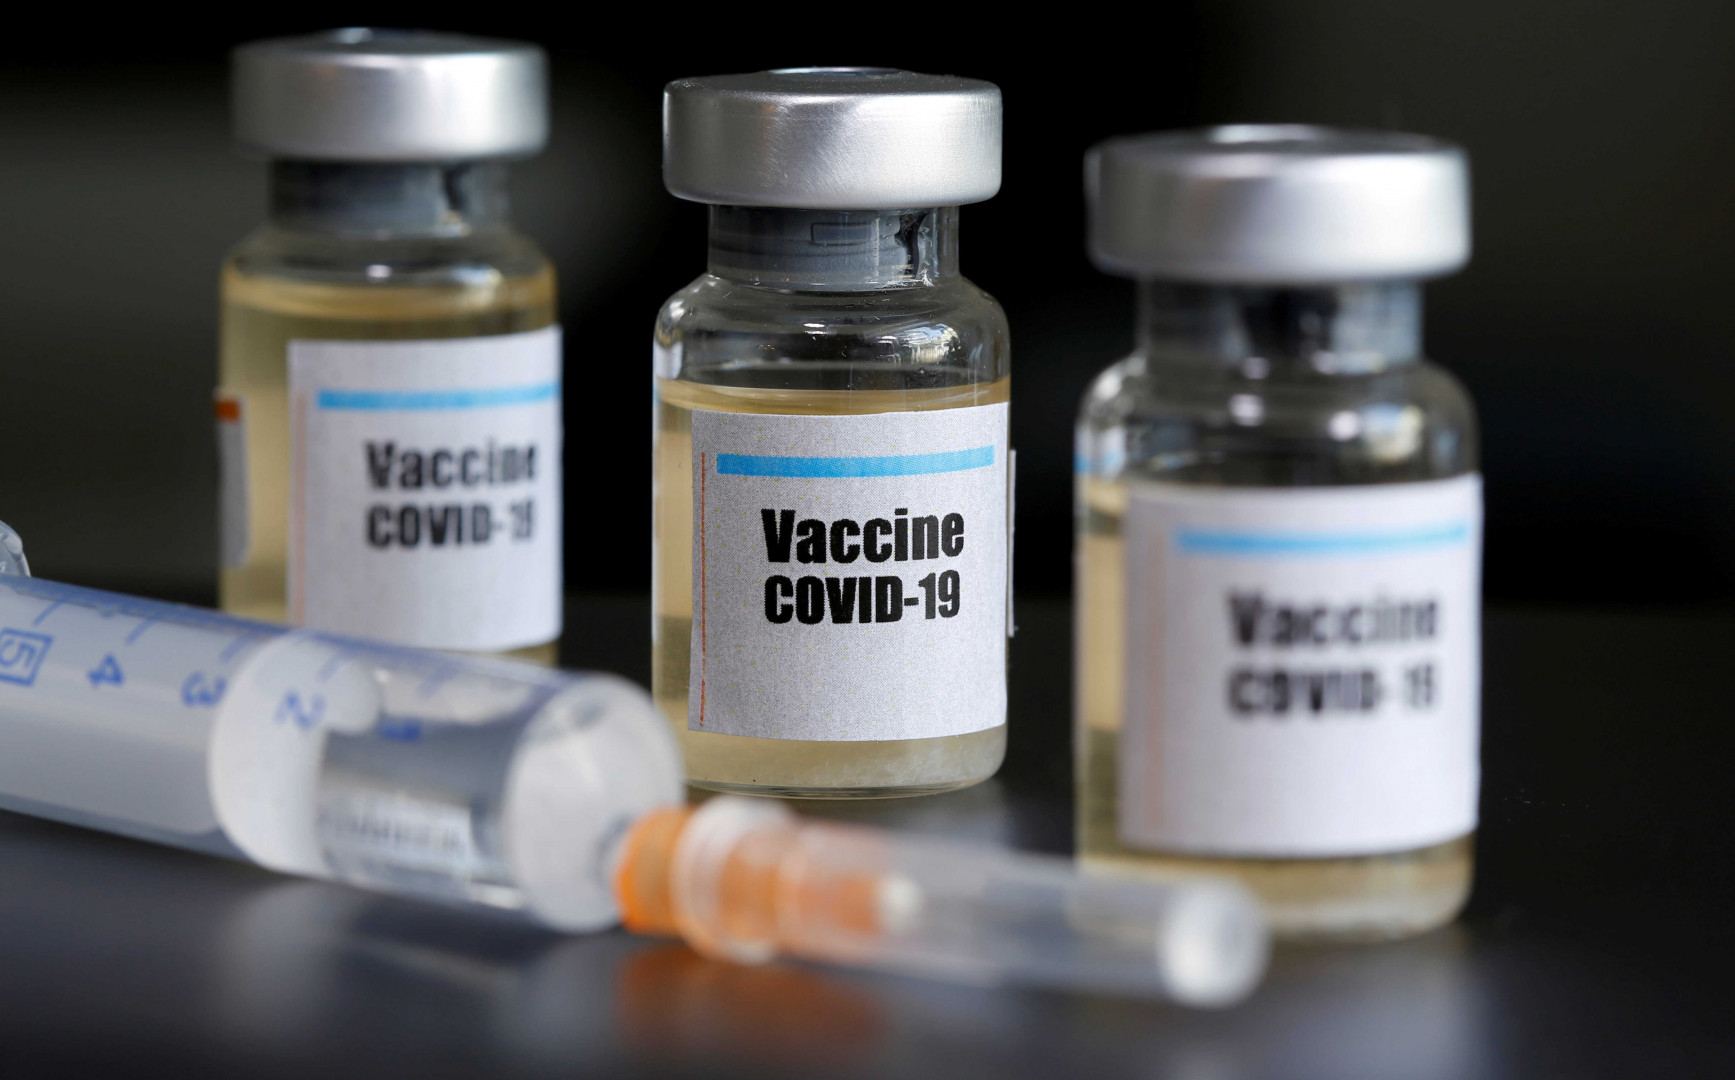  Japan residents to get free Covid-19 vaccine